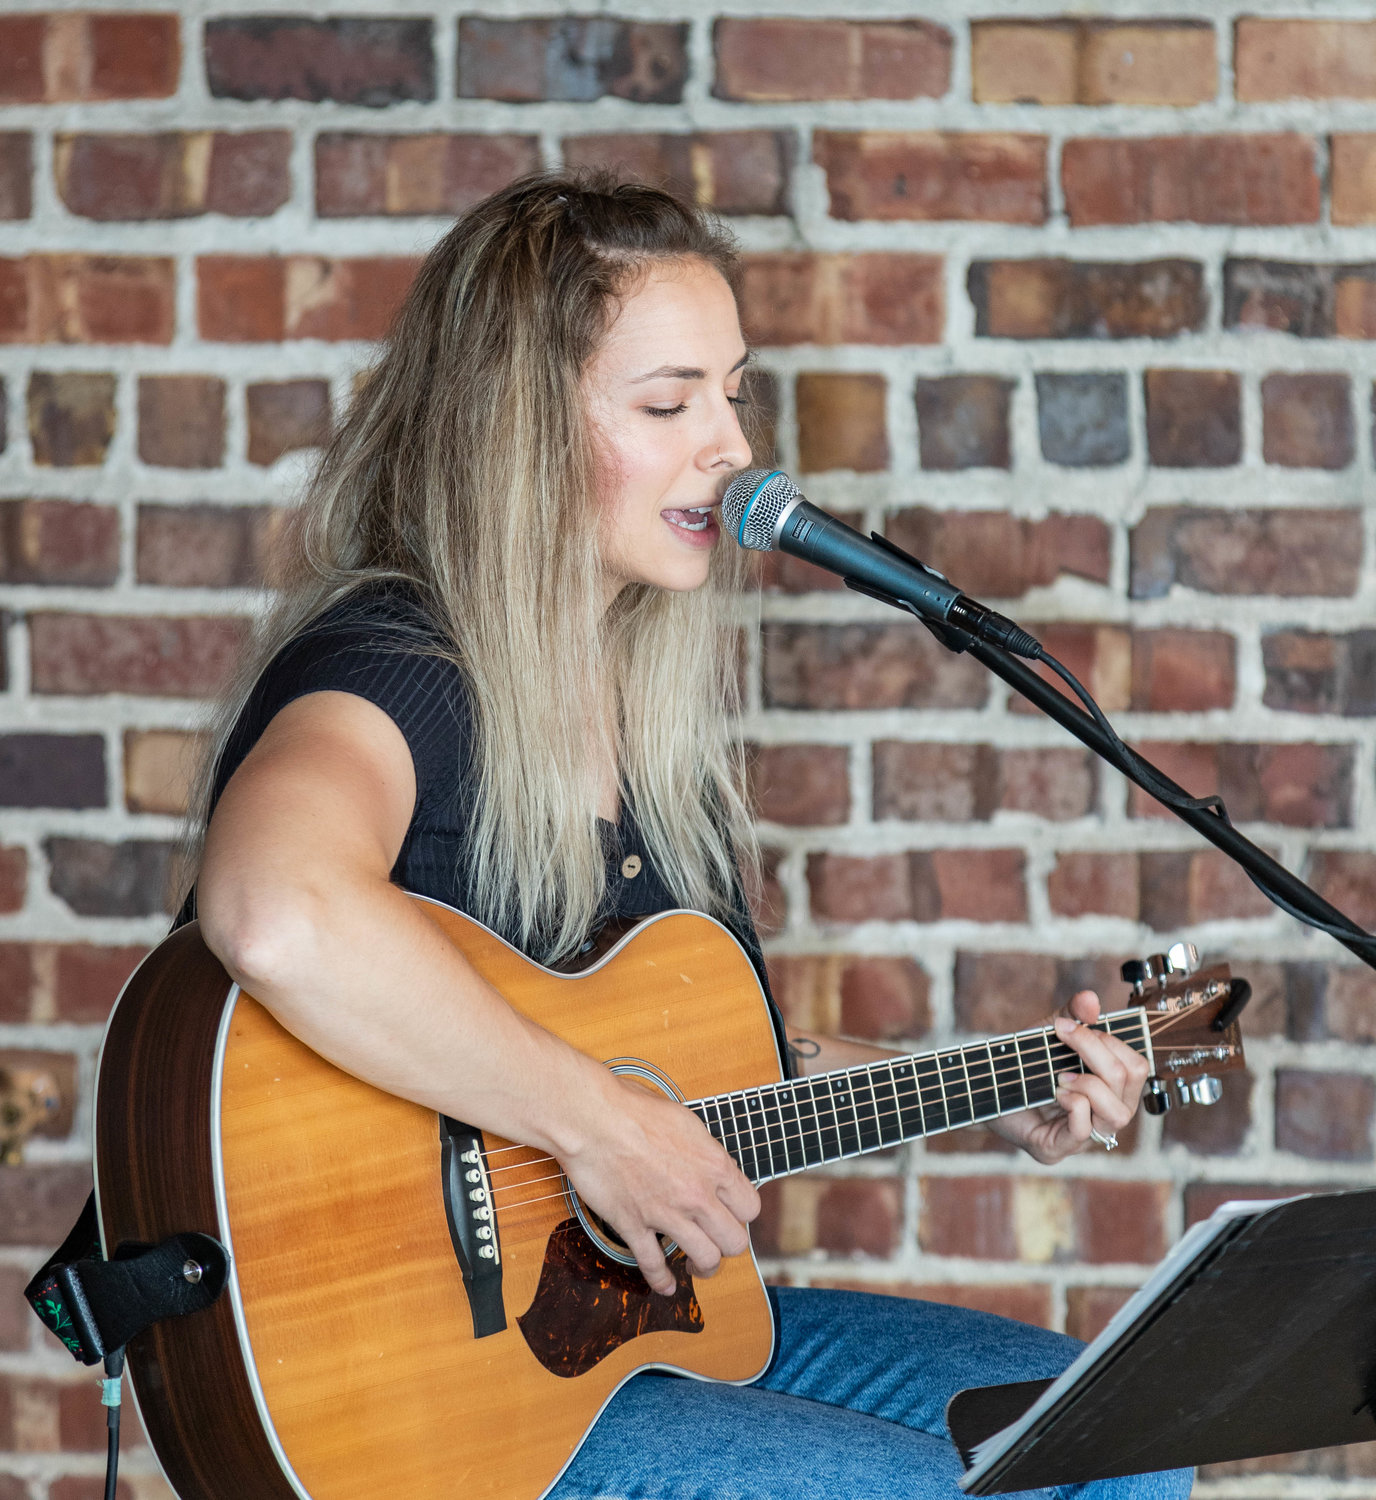 Aly Shipley accompanies herself on acoustic guitar as she sings classic pop and folk songs during June’s Street Food Throwdown at the Fennel.